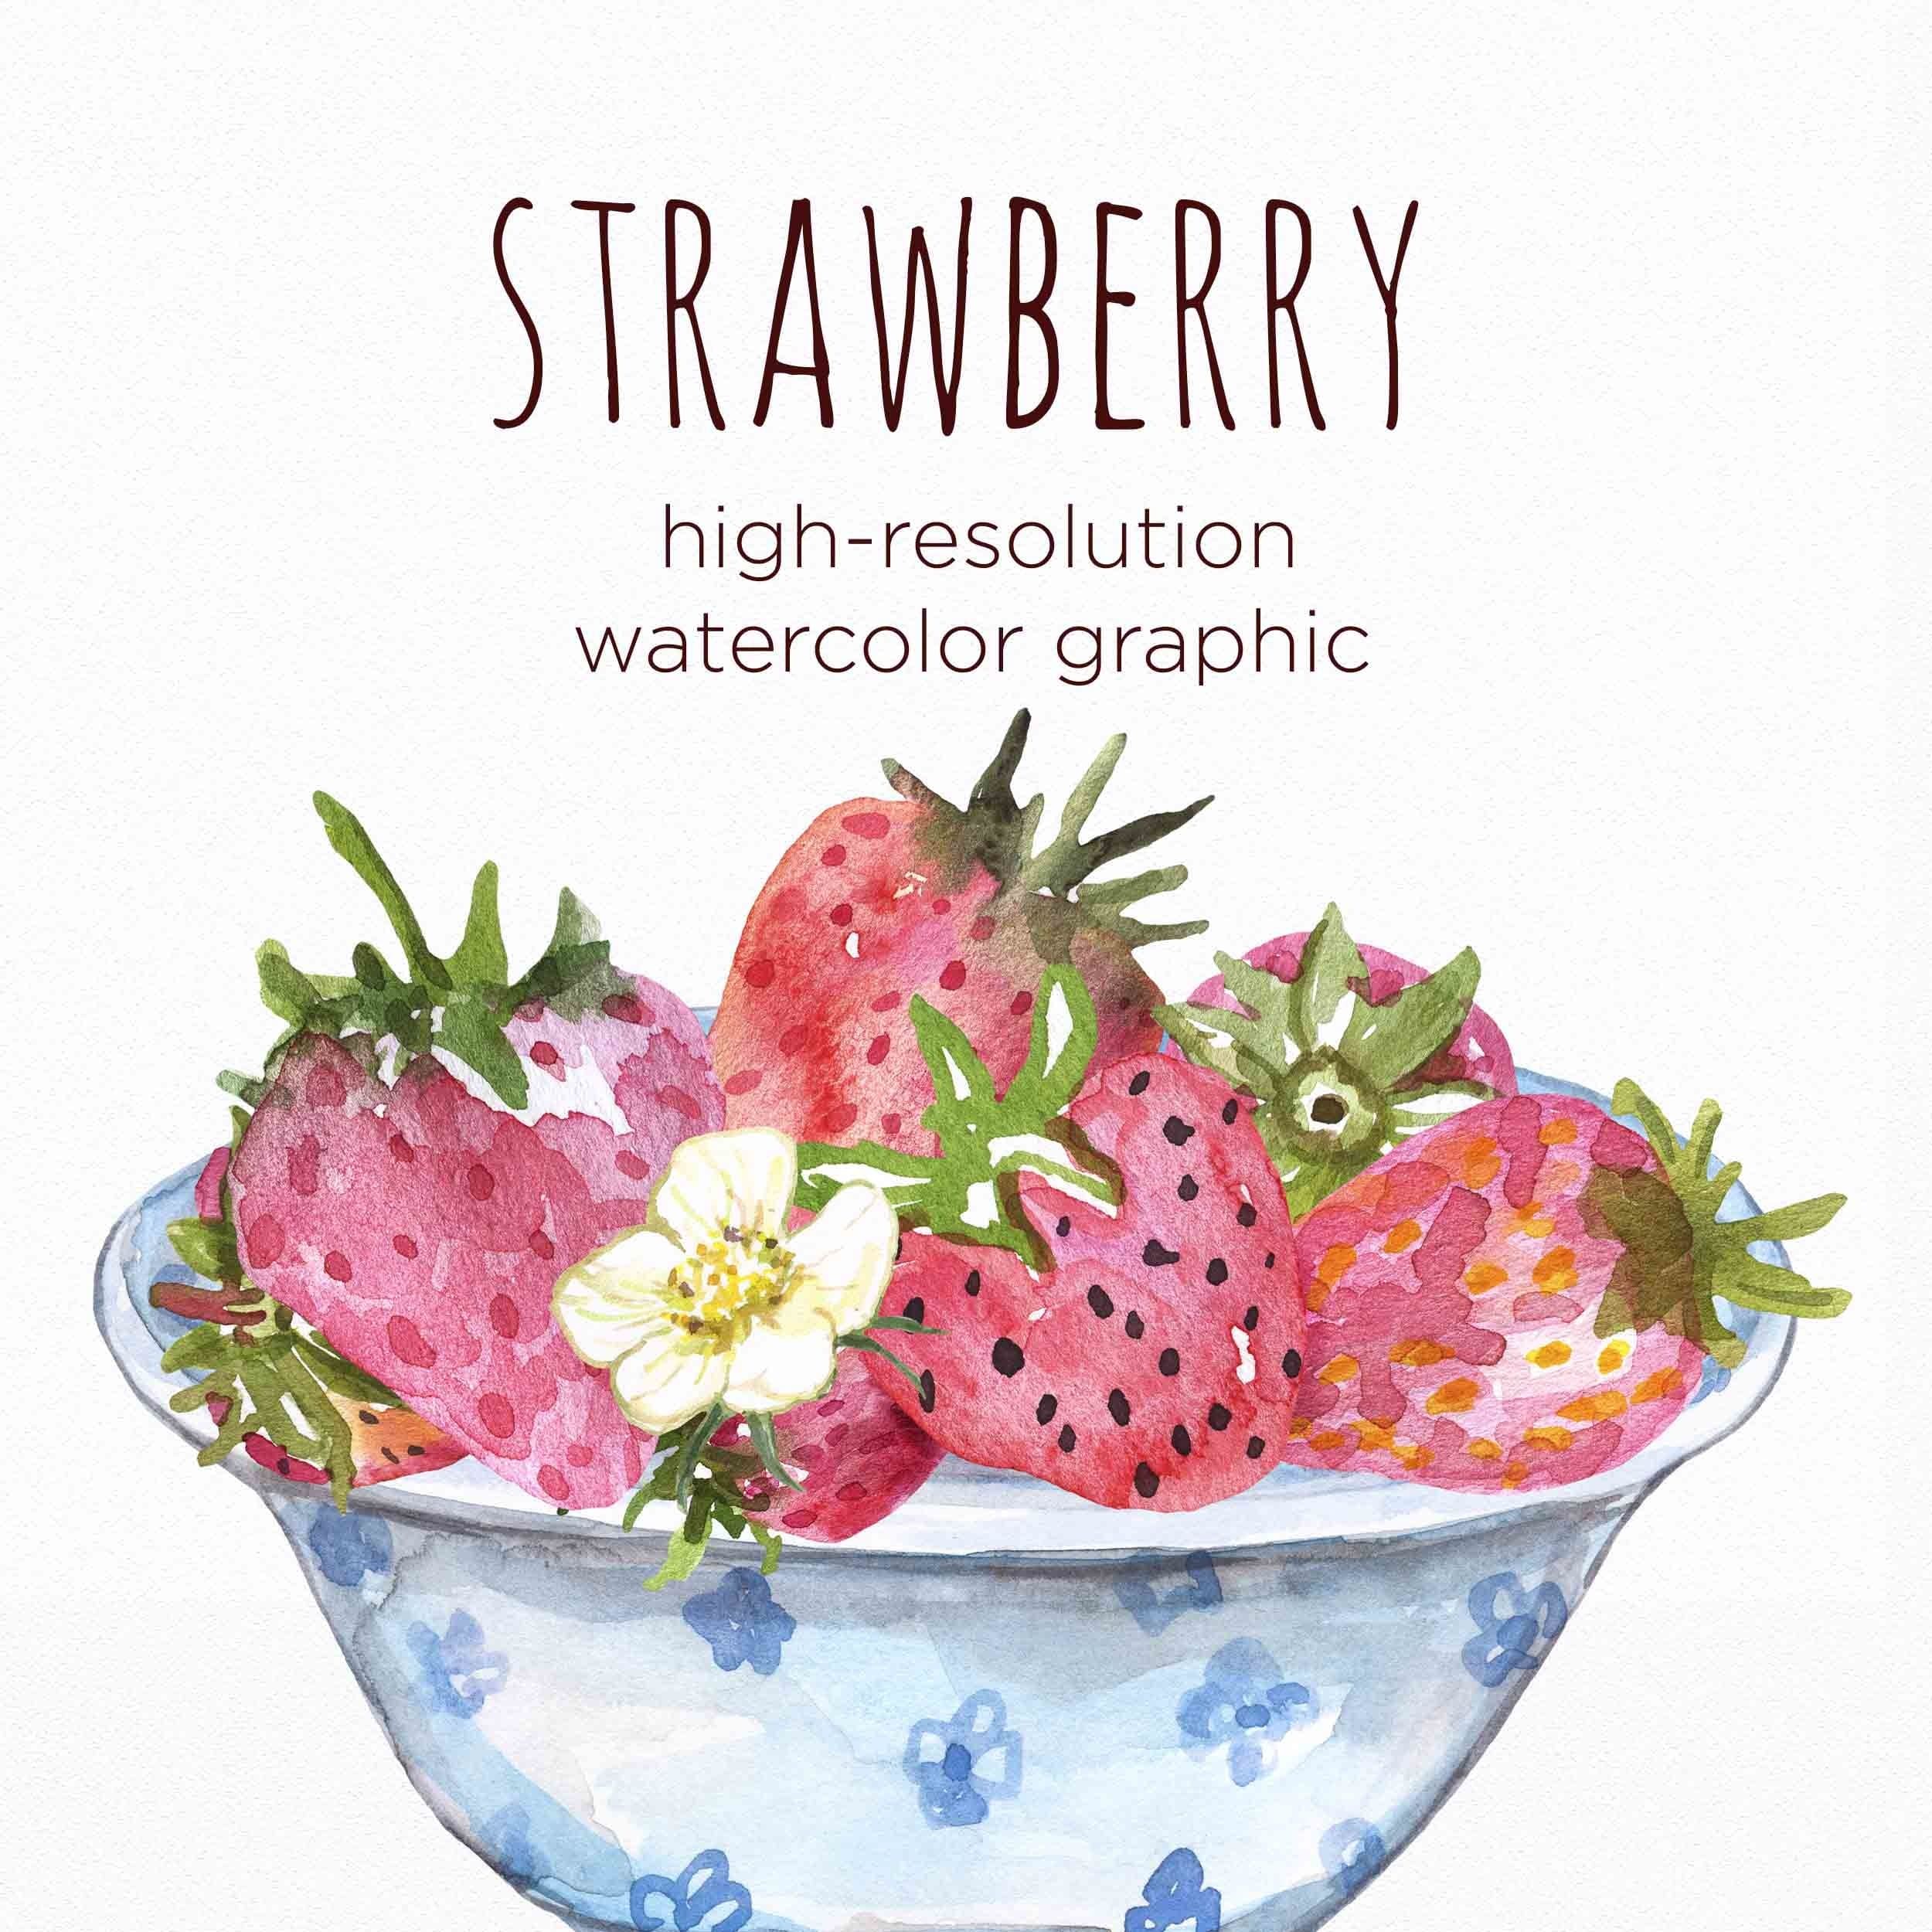 A blue bowl is drawn, in the middle of which is a strawberry.